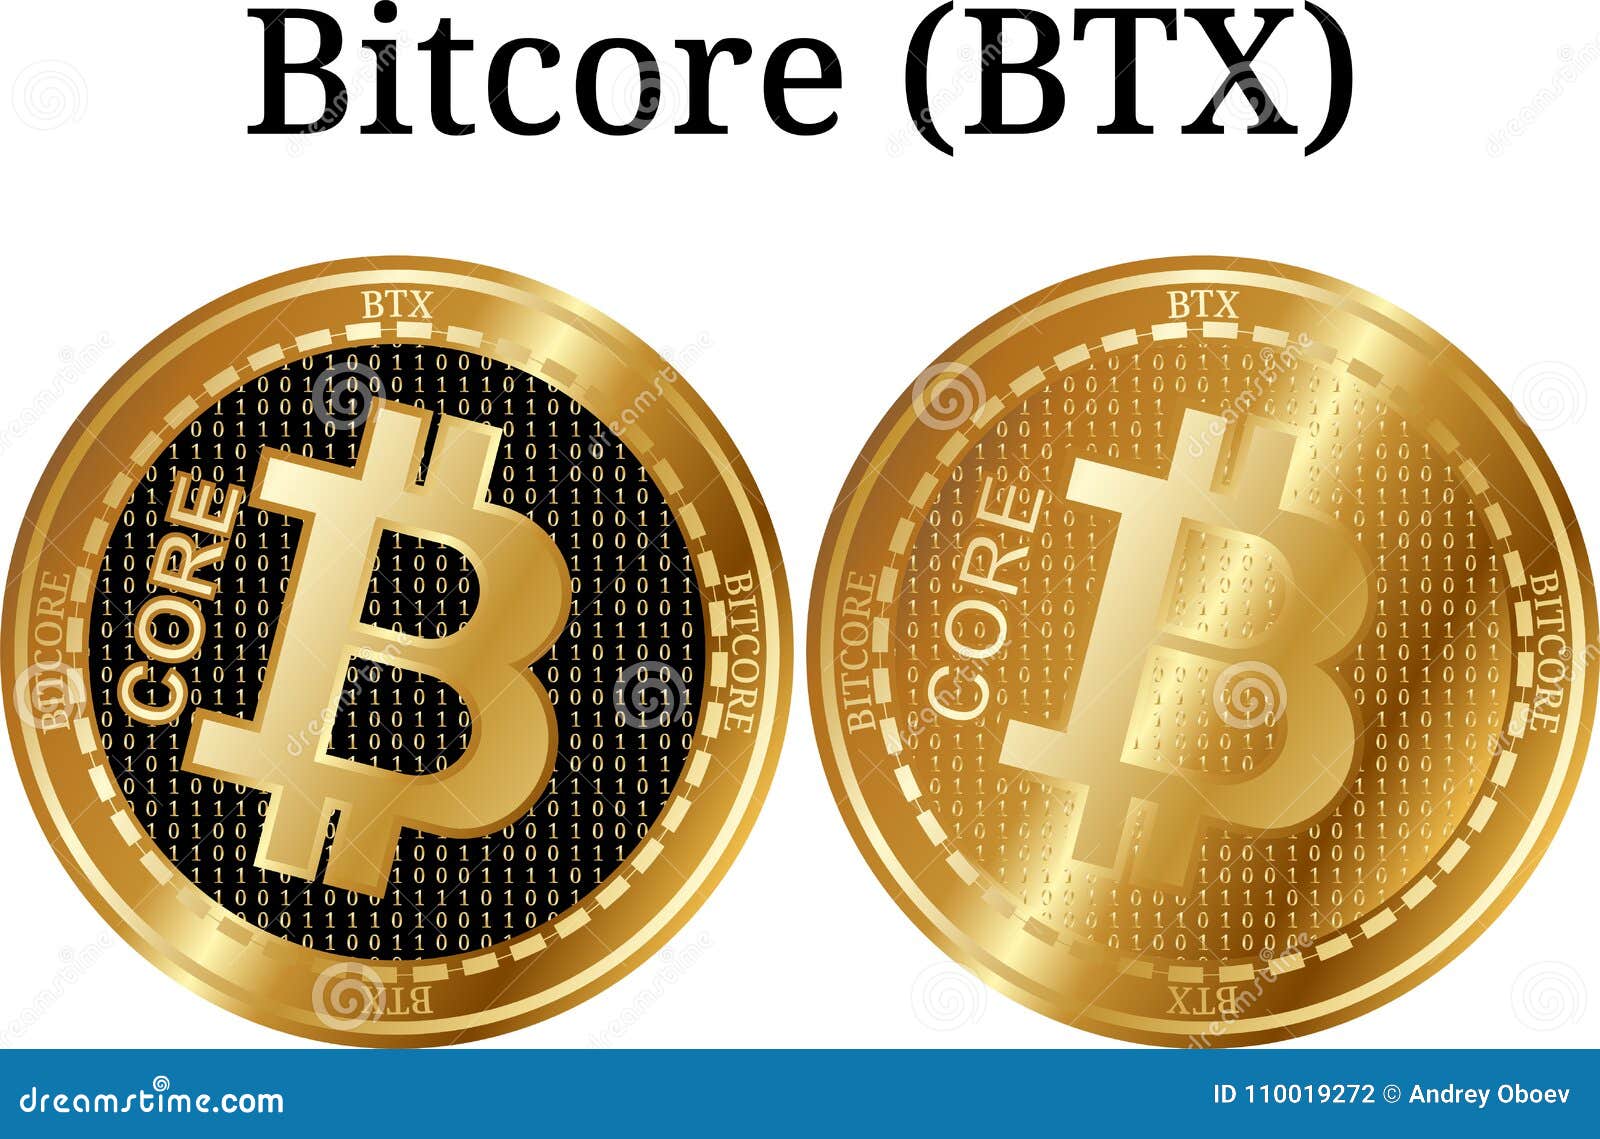 what is btx crypto